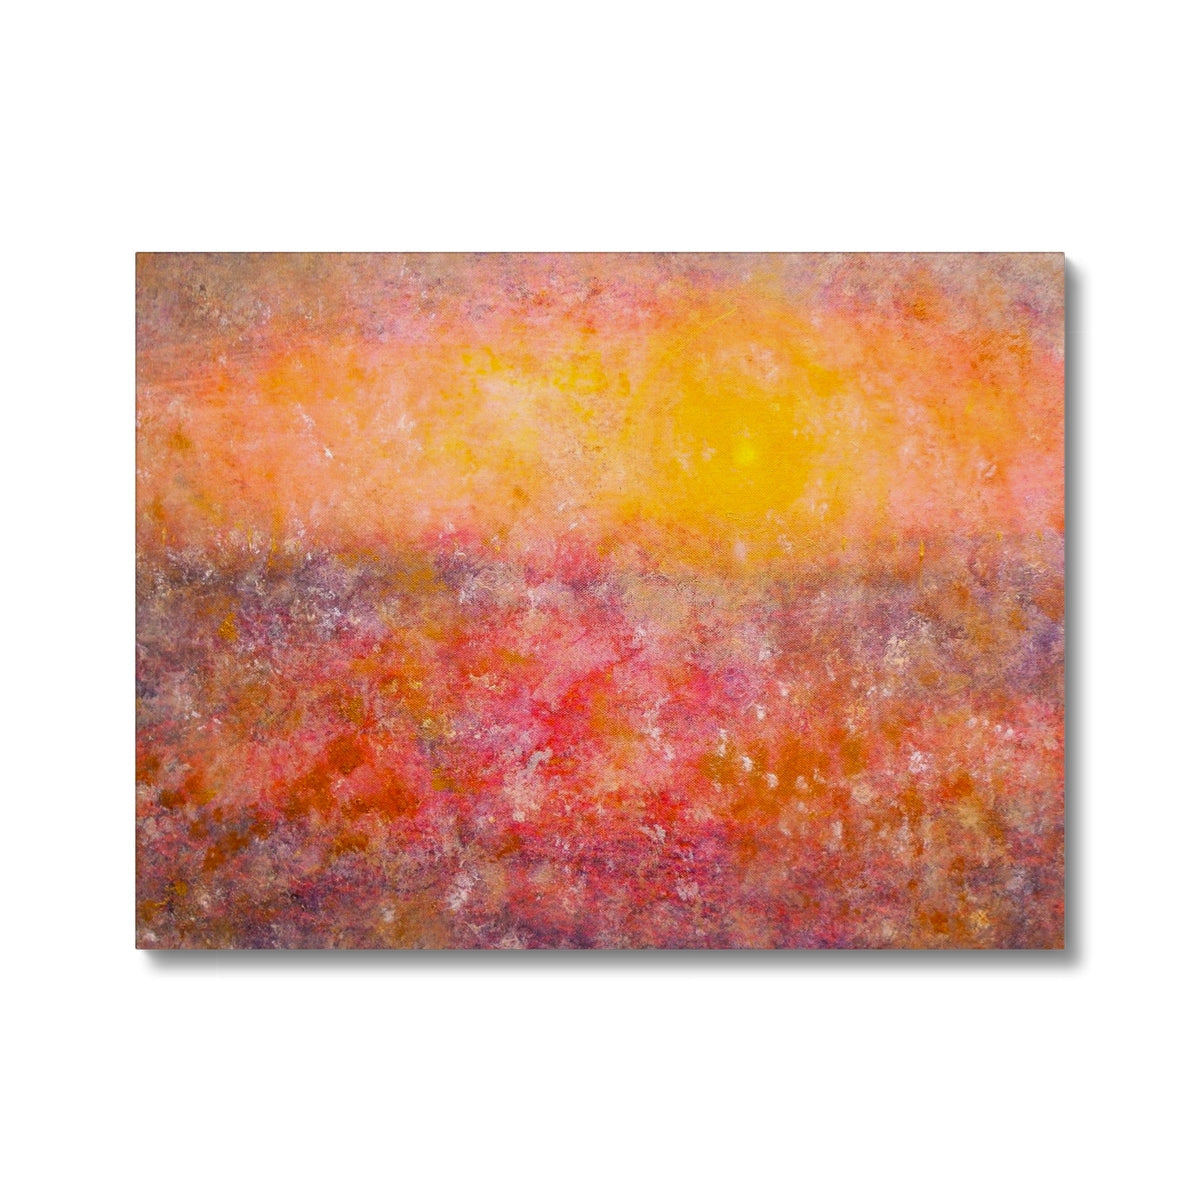 Sunrise Mist Horizon Abstract Painting | Canvas From Scotland-Contemporary Stretched Canvas Prints-Abstract & Impressionistic Art Gallery-24"x18"-Paintings, Prints, Homeware, Art Gifts From Scotland By Scottish Artist Kevin Hunter